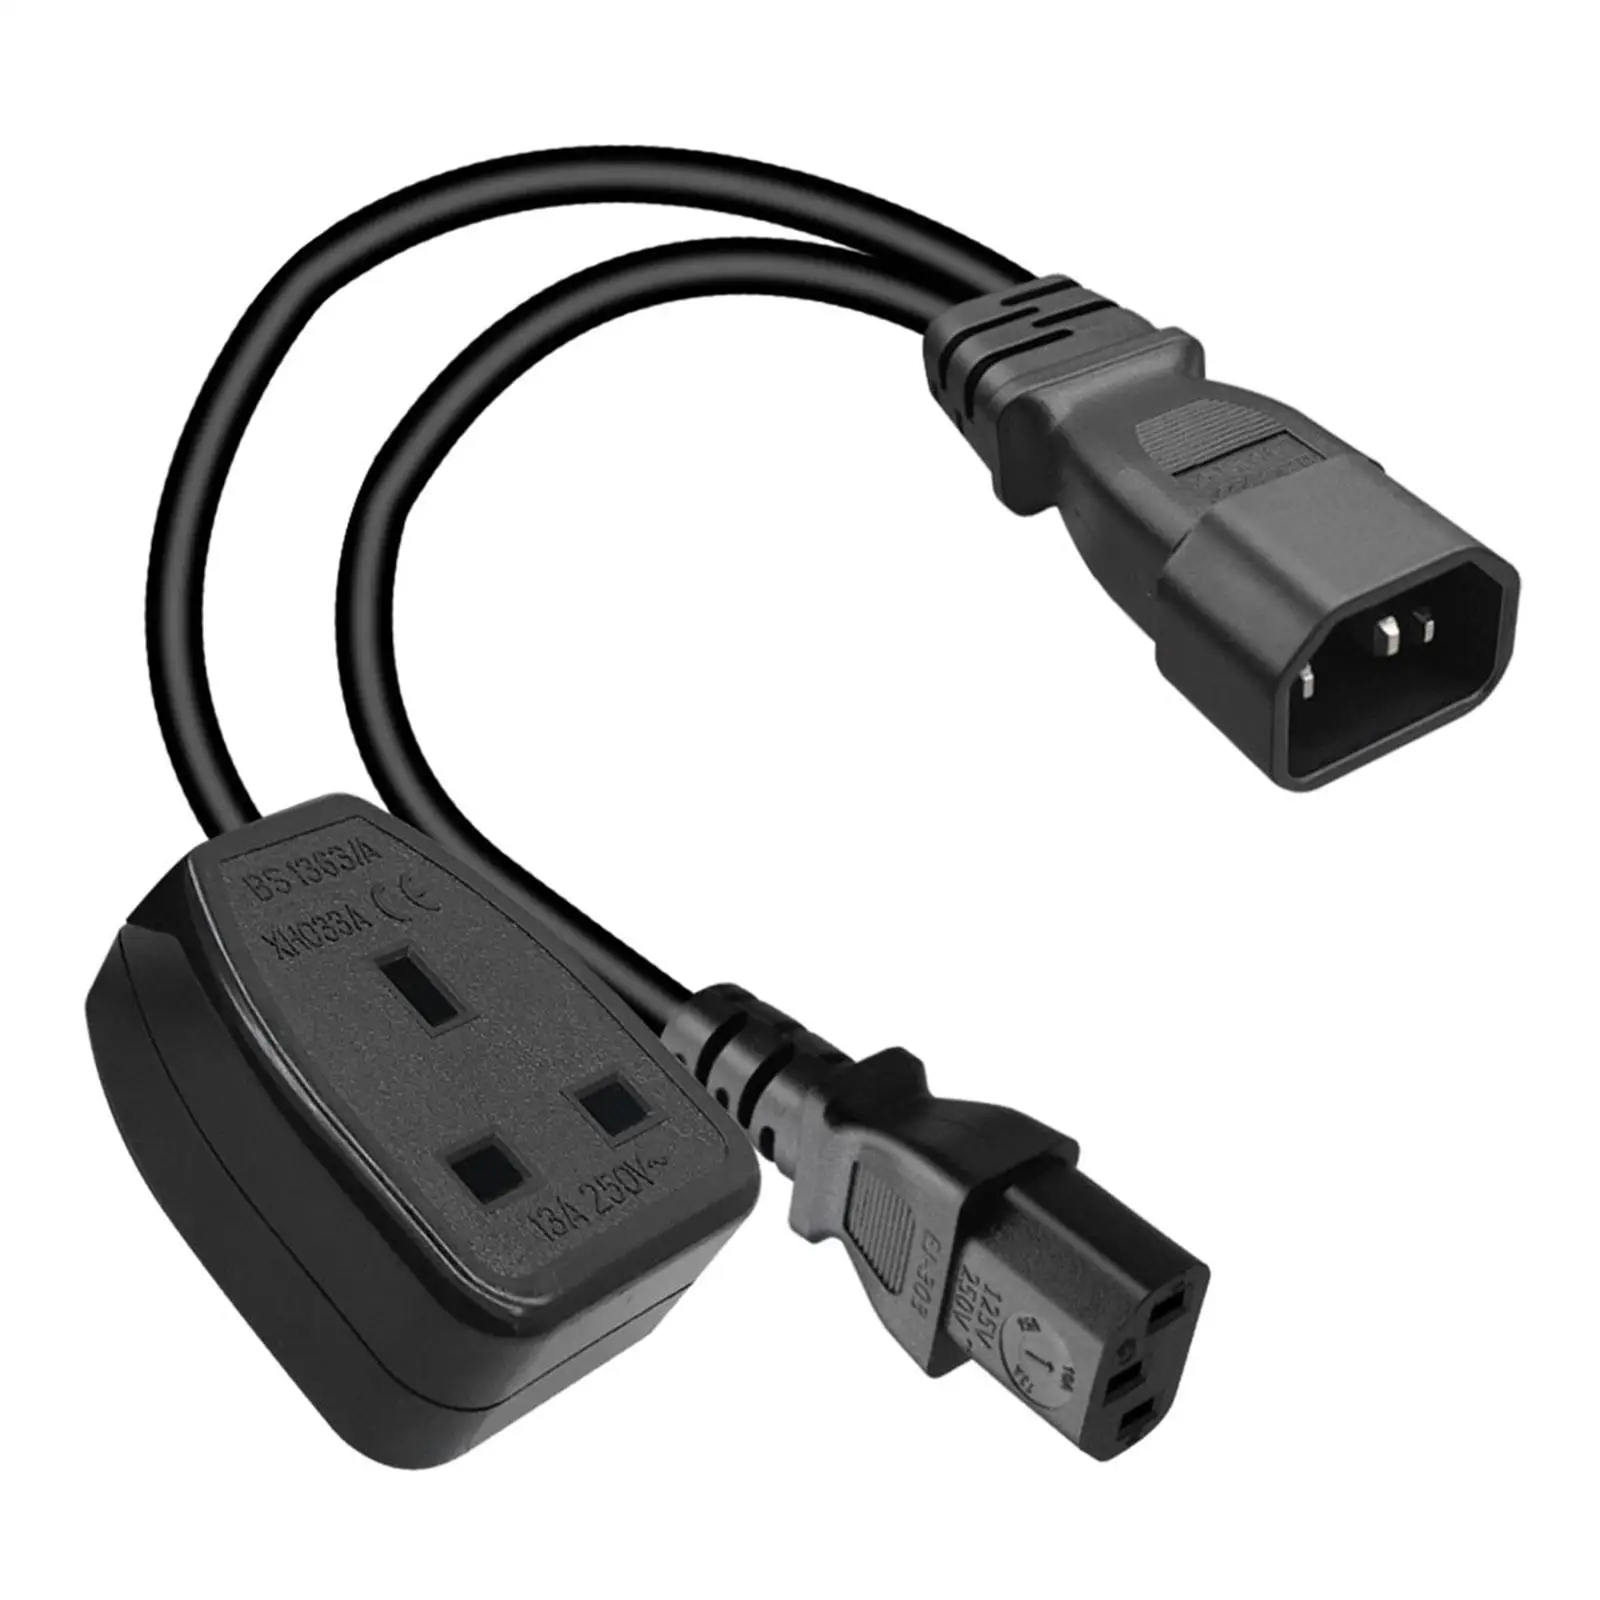 Universal C14 Male to C13 UK Female Convertor Cord Spare Parts 3 Pin to 3 Pin 2500W 13A Waterproof IEC320 C14 to C13 Power Cable